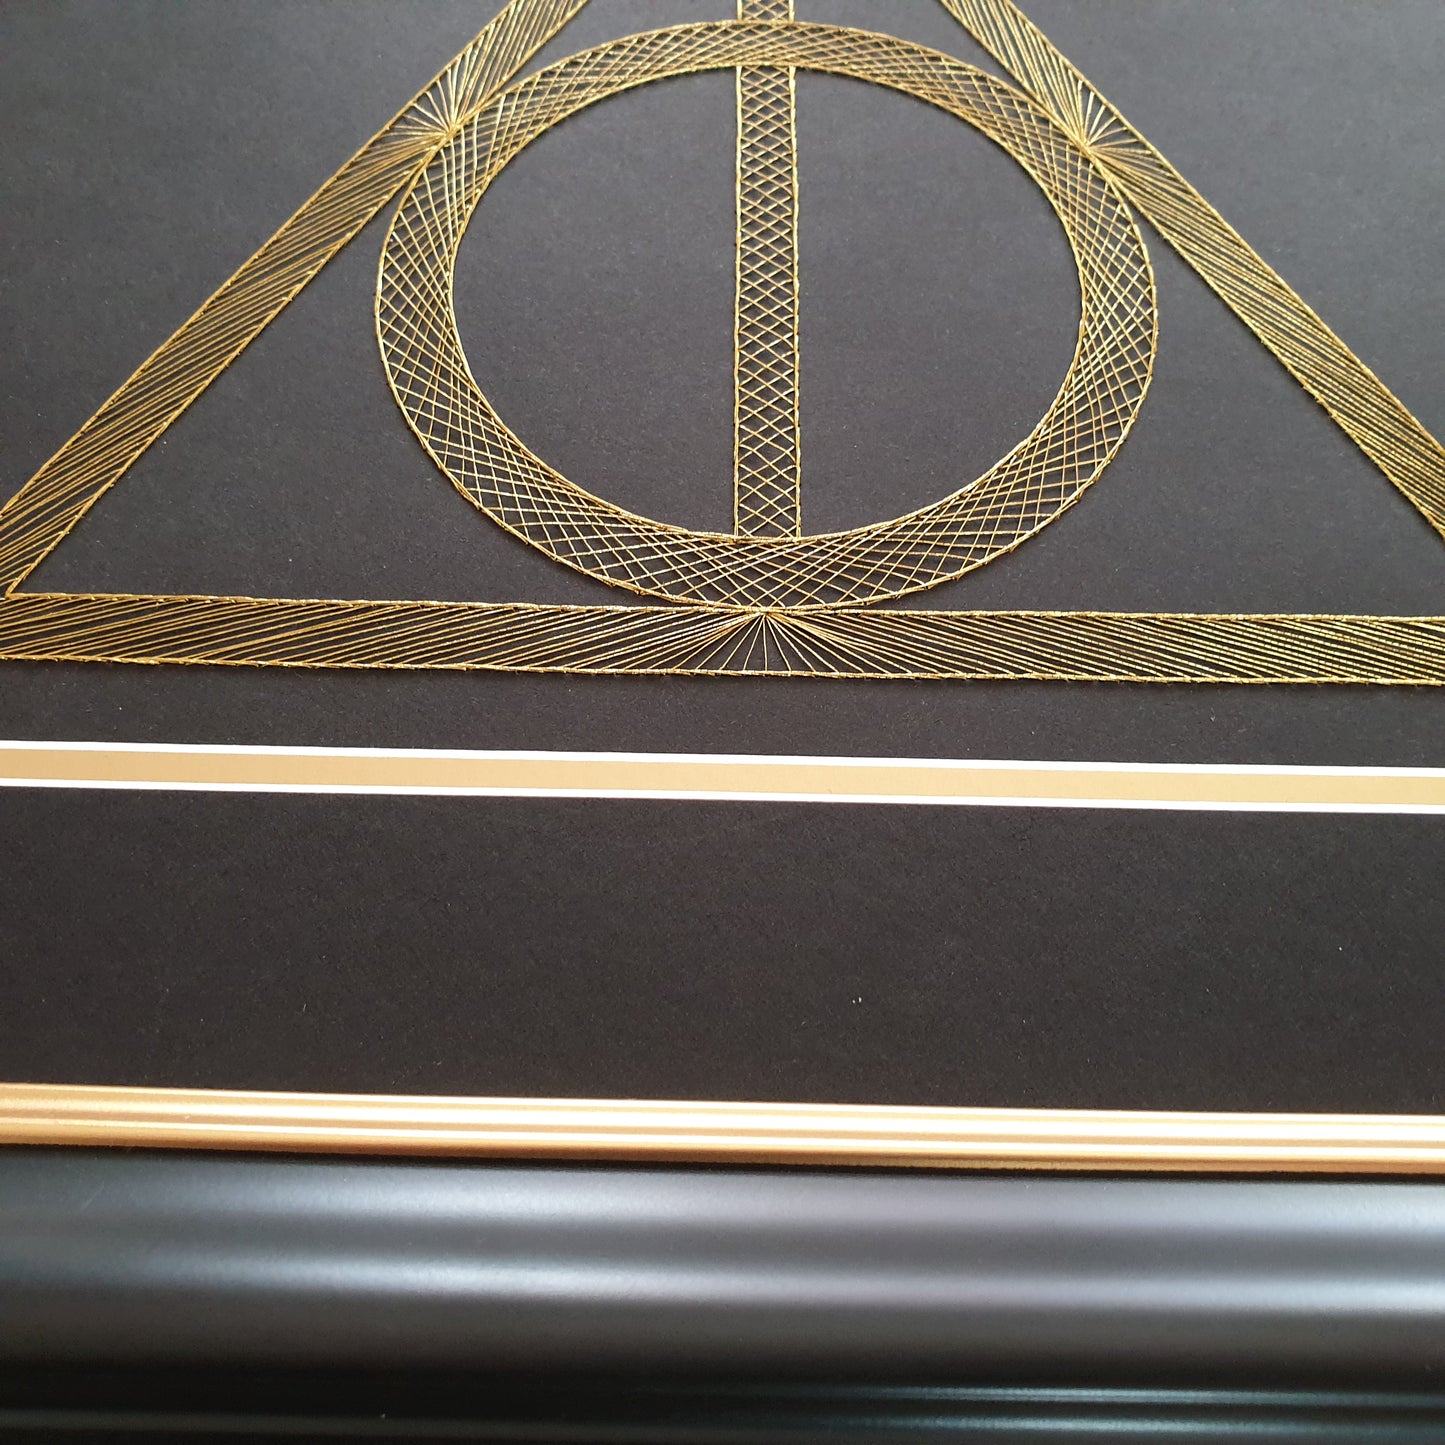 Harry Potter Deathly Hallows Inspired Hand-Stitched Artwork (Black Card)